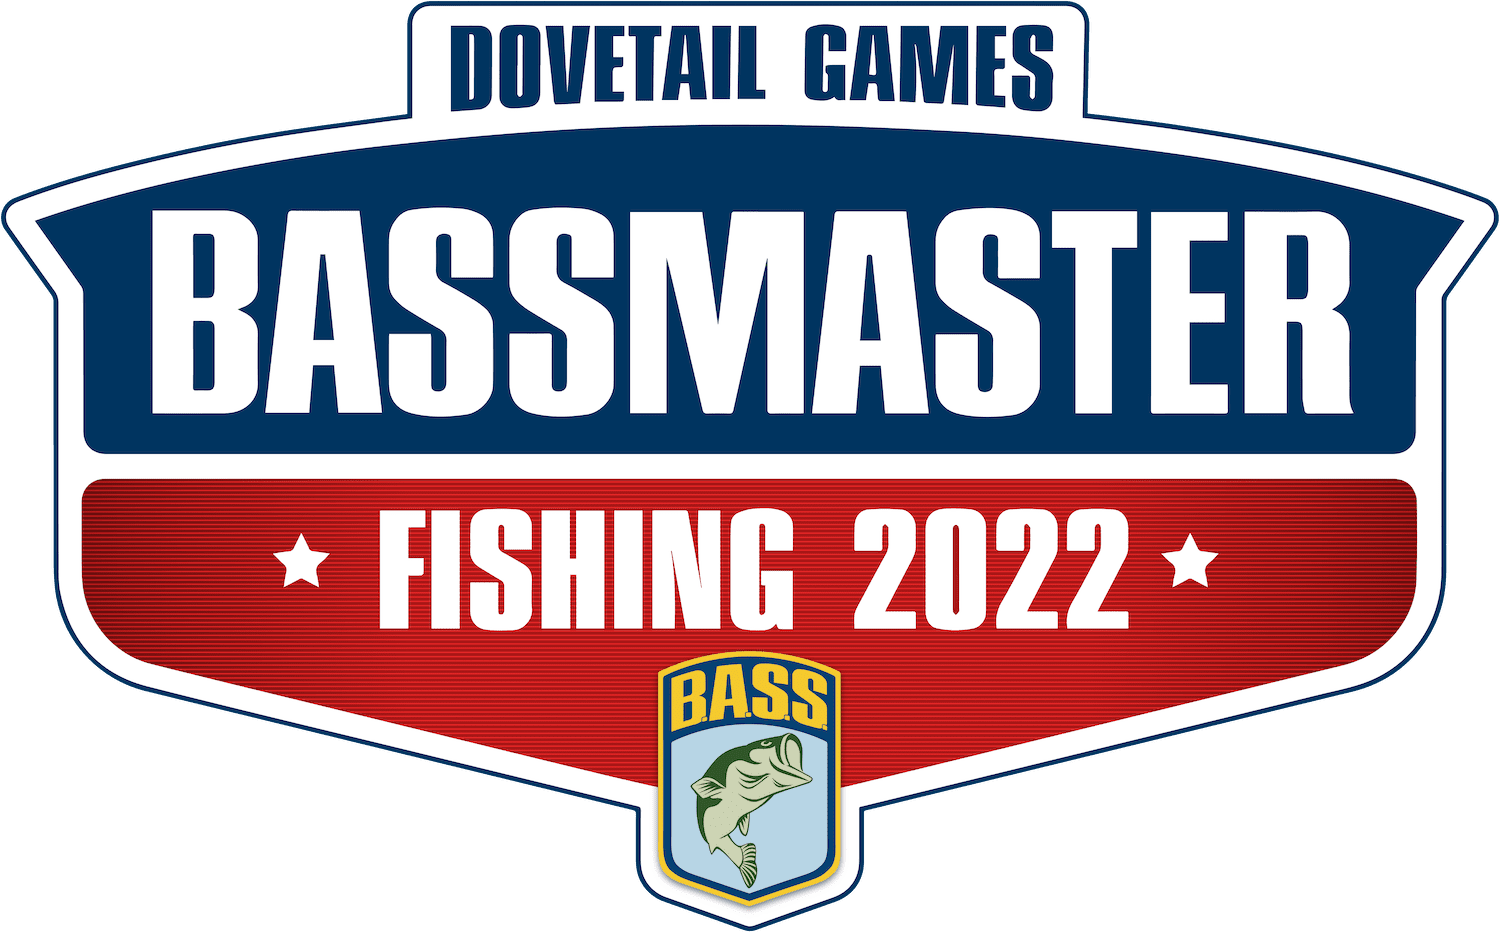 Experience The Thrill Of Big Bass Fishing With Bassmaster Fishing 2022, Coming This Fall